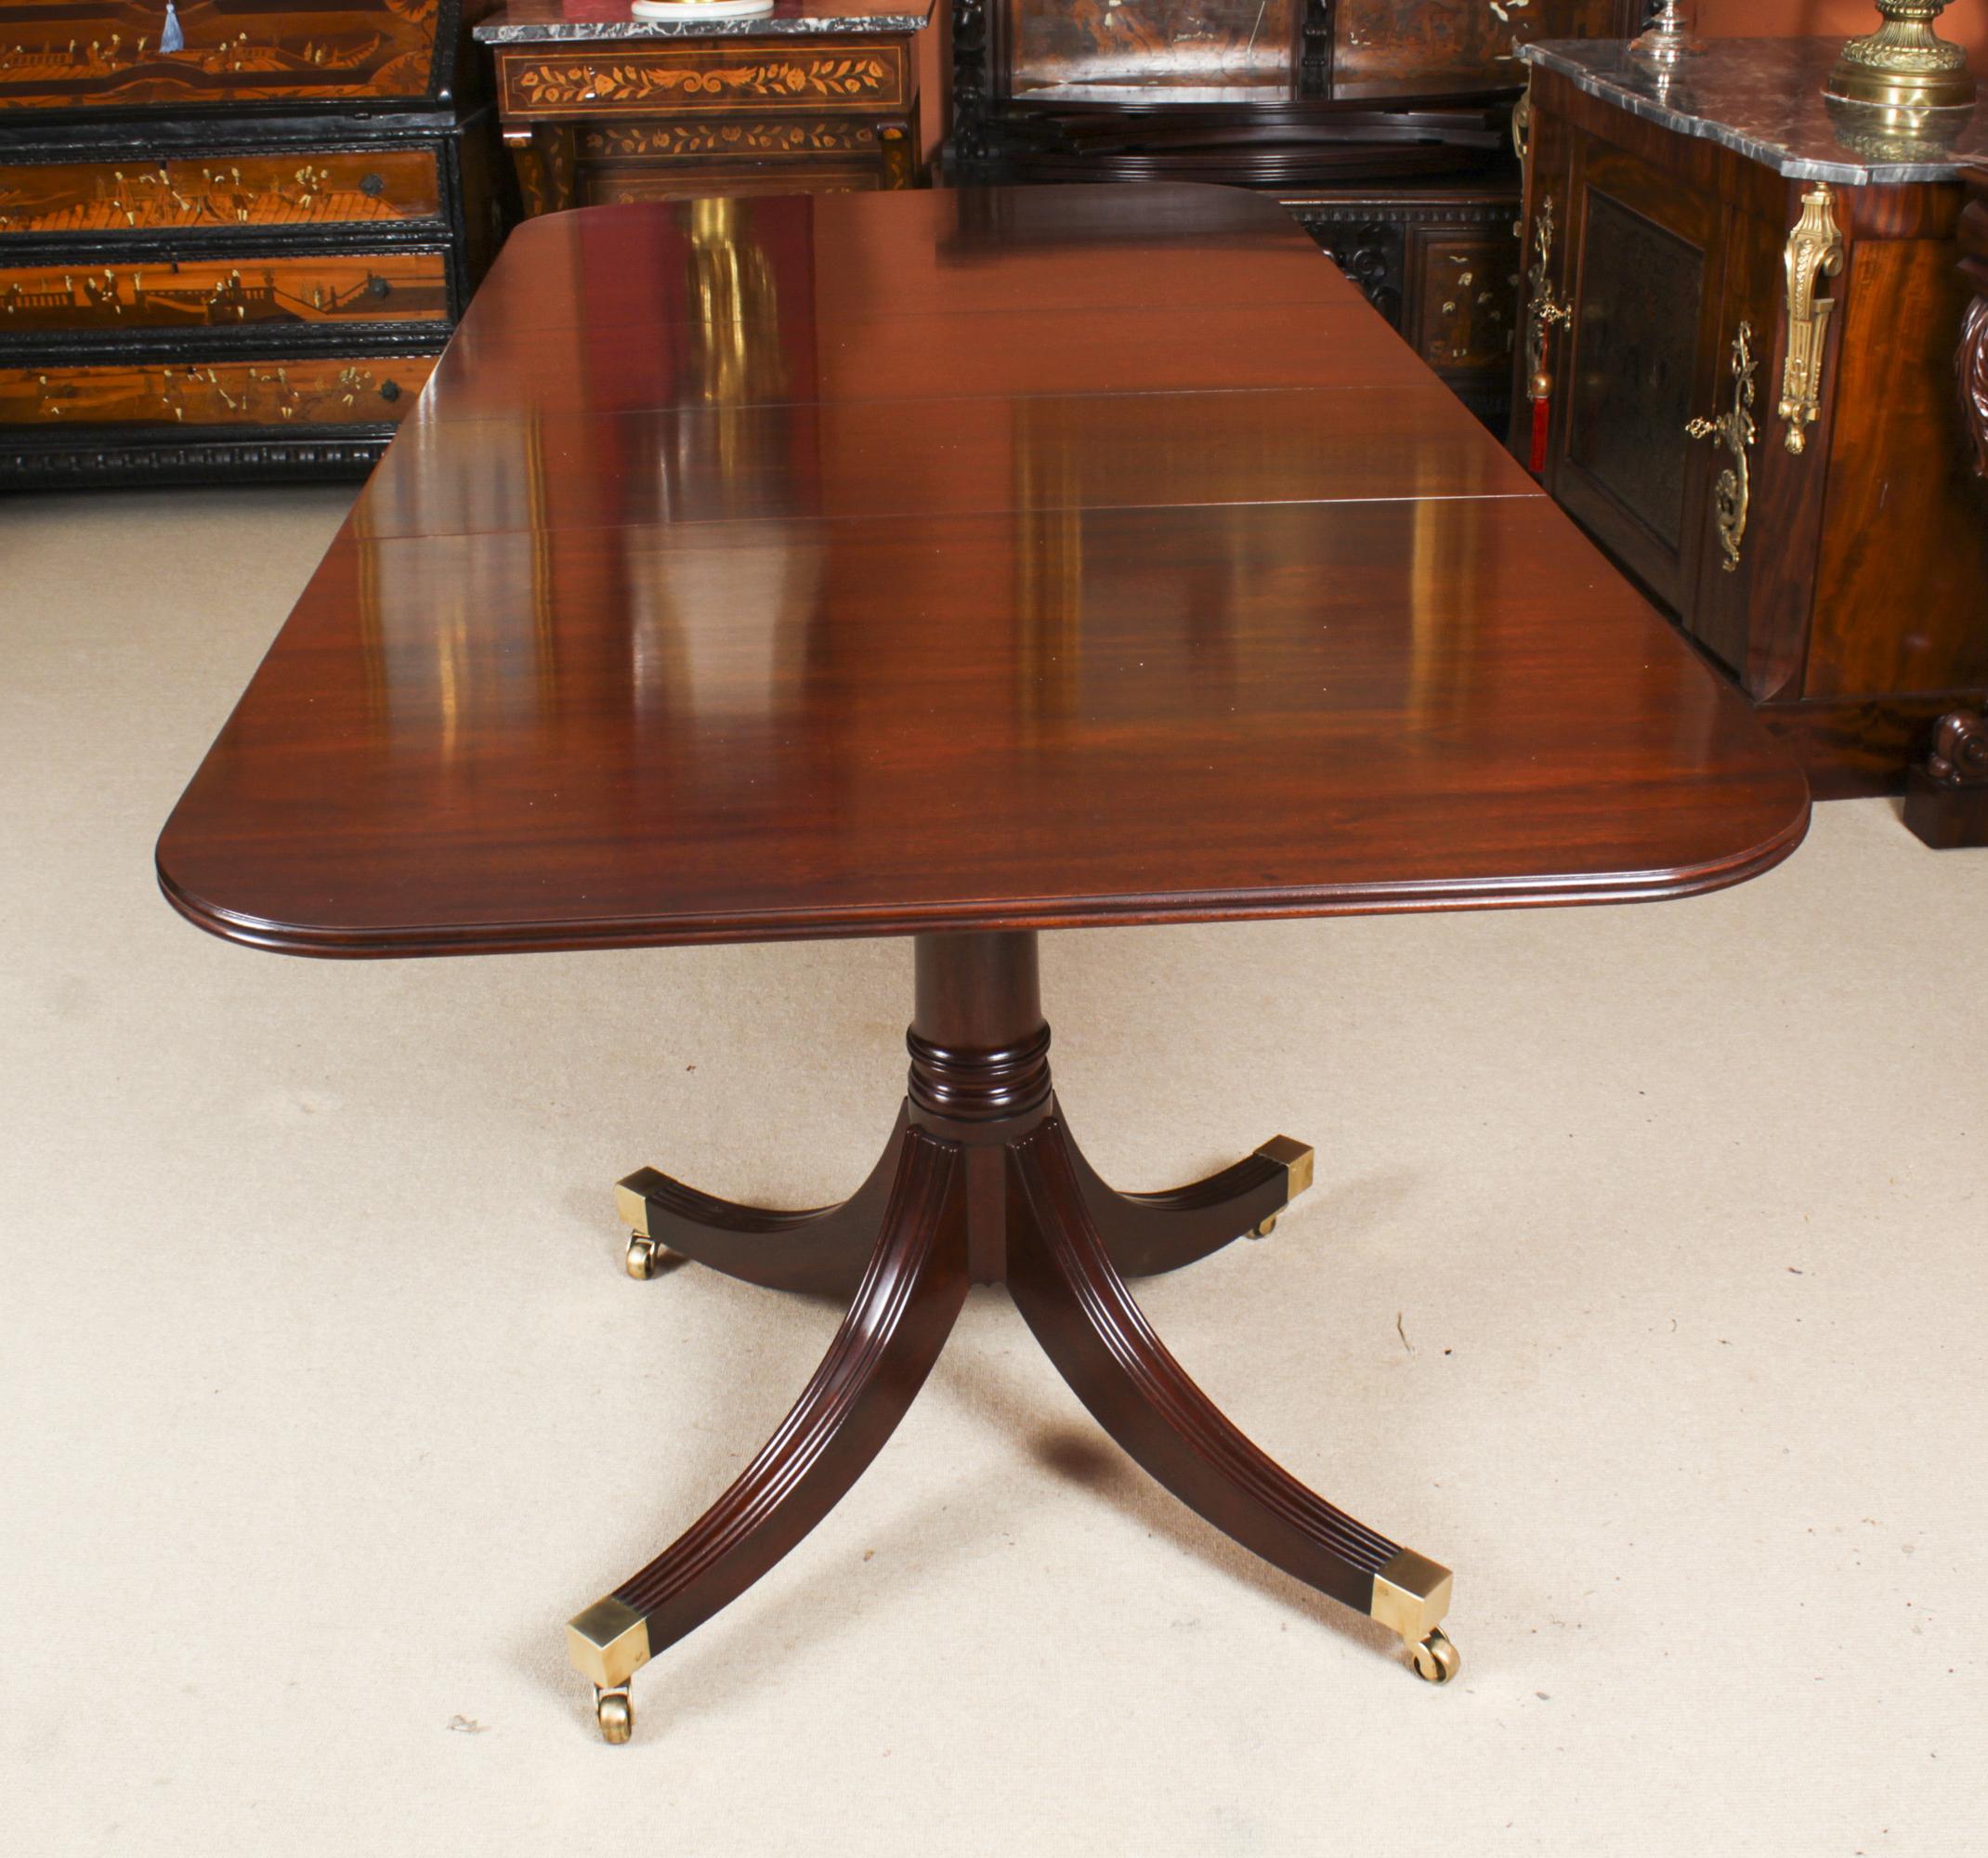 This is a fabulous Vintage Regency Revival twin pillar dining table dating from the mid 20th century.

The table is made of stunning solid flame mahogany and is raised on twin 